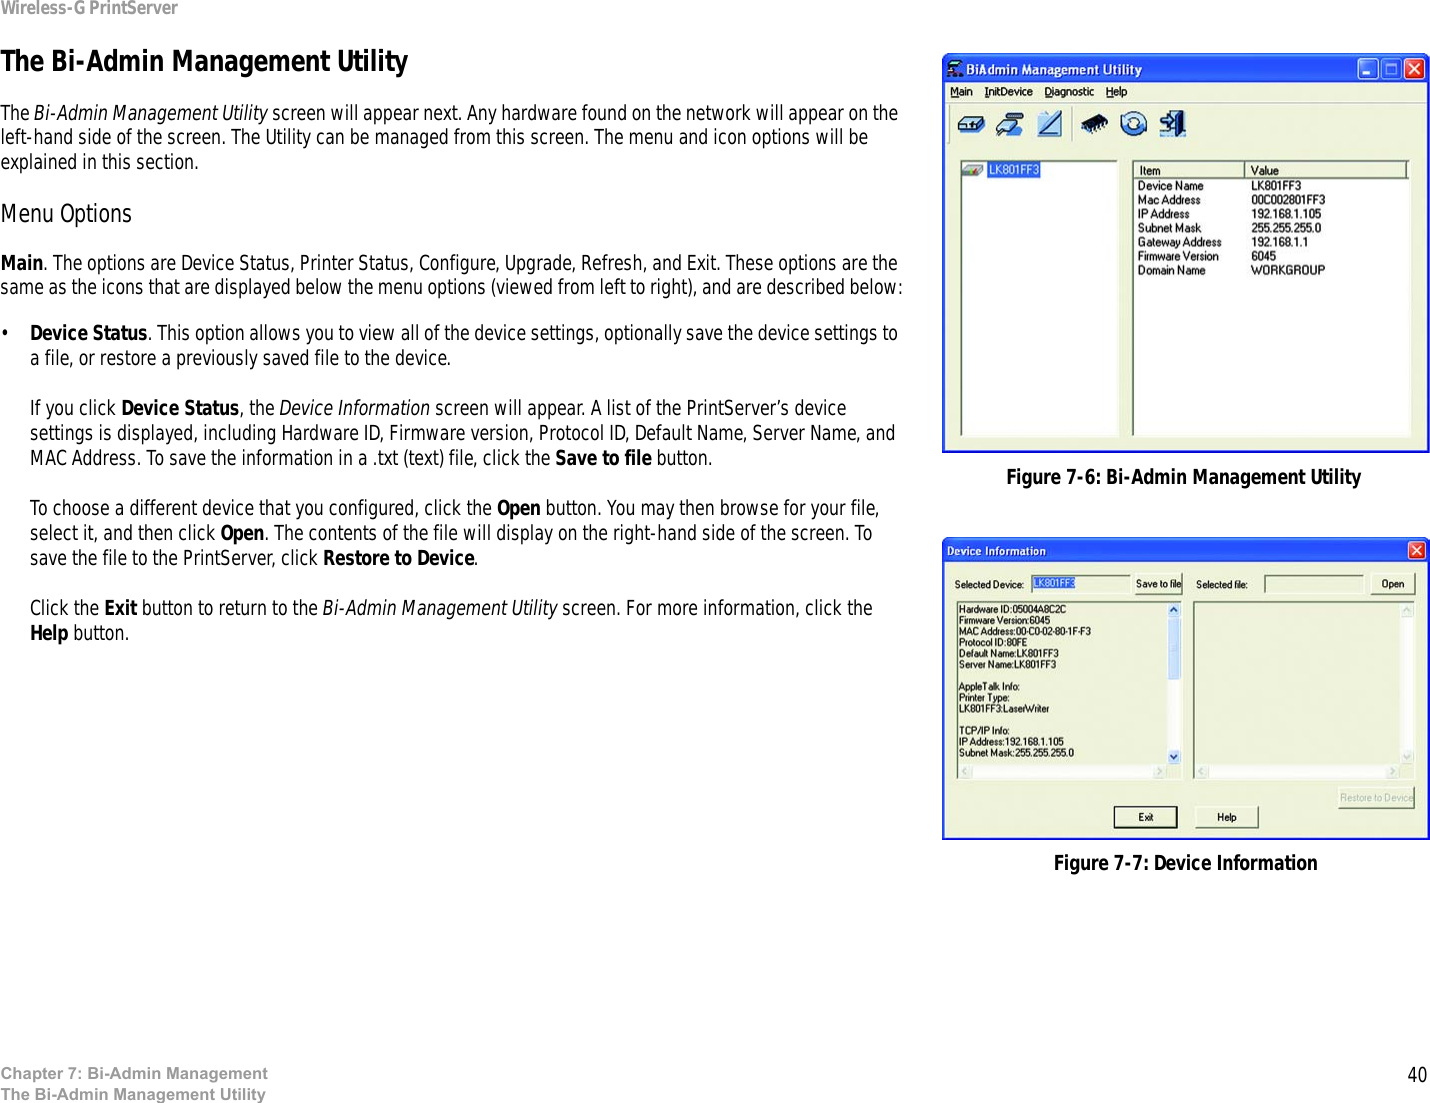 40Wireless-G PrintServerChapter 7: Bi-Admin ManagementThe Bi-Admin Management UtilityThe Bi-Admin Management UtilityThe Bi-Admin Management Utility screen will appear next. Any hardware found on the network will appear on the left-hand side of the screen. The Utility can be managed from this screen. The menu and icon options will be explained in this section.Menu OptionsMain. The options are Device Status, Printer Status, Configure, Upgrade, Refresh, and Exit. These options are the same as the icons that are displayed below the menu options (viewed from left to right), and are described below:•Device Status. This option allows you to view all of the device settings, optionally save the device settings to a file, or restore a previously saved file to the device.If you click Device Status, the Device Information screen will appear. A list of the PrintServer’s device settings is displayed, including Hardware ID, Firmware version, Protocol ID, Default Name, Server Name, and MAC Address. To save the information in a .txt (text) file, click the Save to file button. To choose a different device that you configured, click the Open button. You may then browse for your file, select it, and then click Open. The contents of the file will display on the right-hand side of the screen. To save the file to the PrintServer, click Restore to Device.Click the Exit button to return to the Bi-Admin Management Utility screen. For more information, click the Help button.Figure 7-6: Bi-Admin Management UtilityFigure 7-7: Device Information